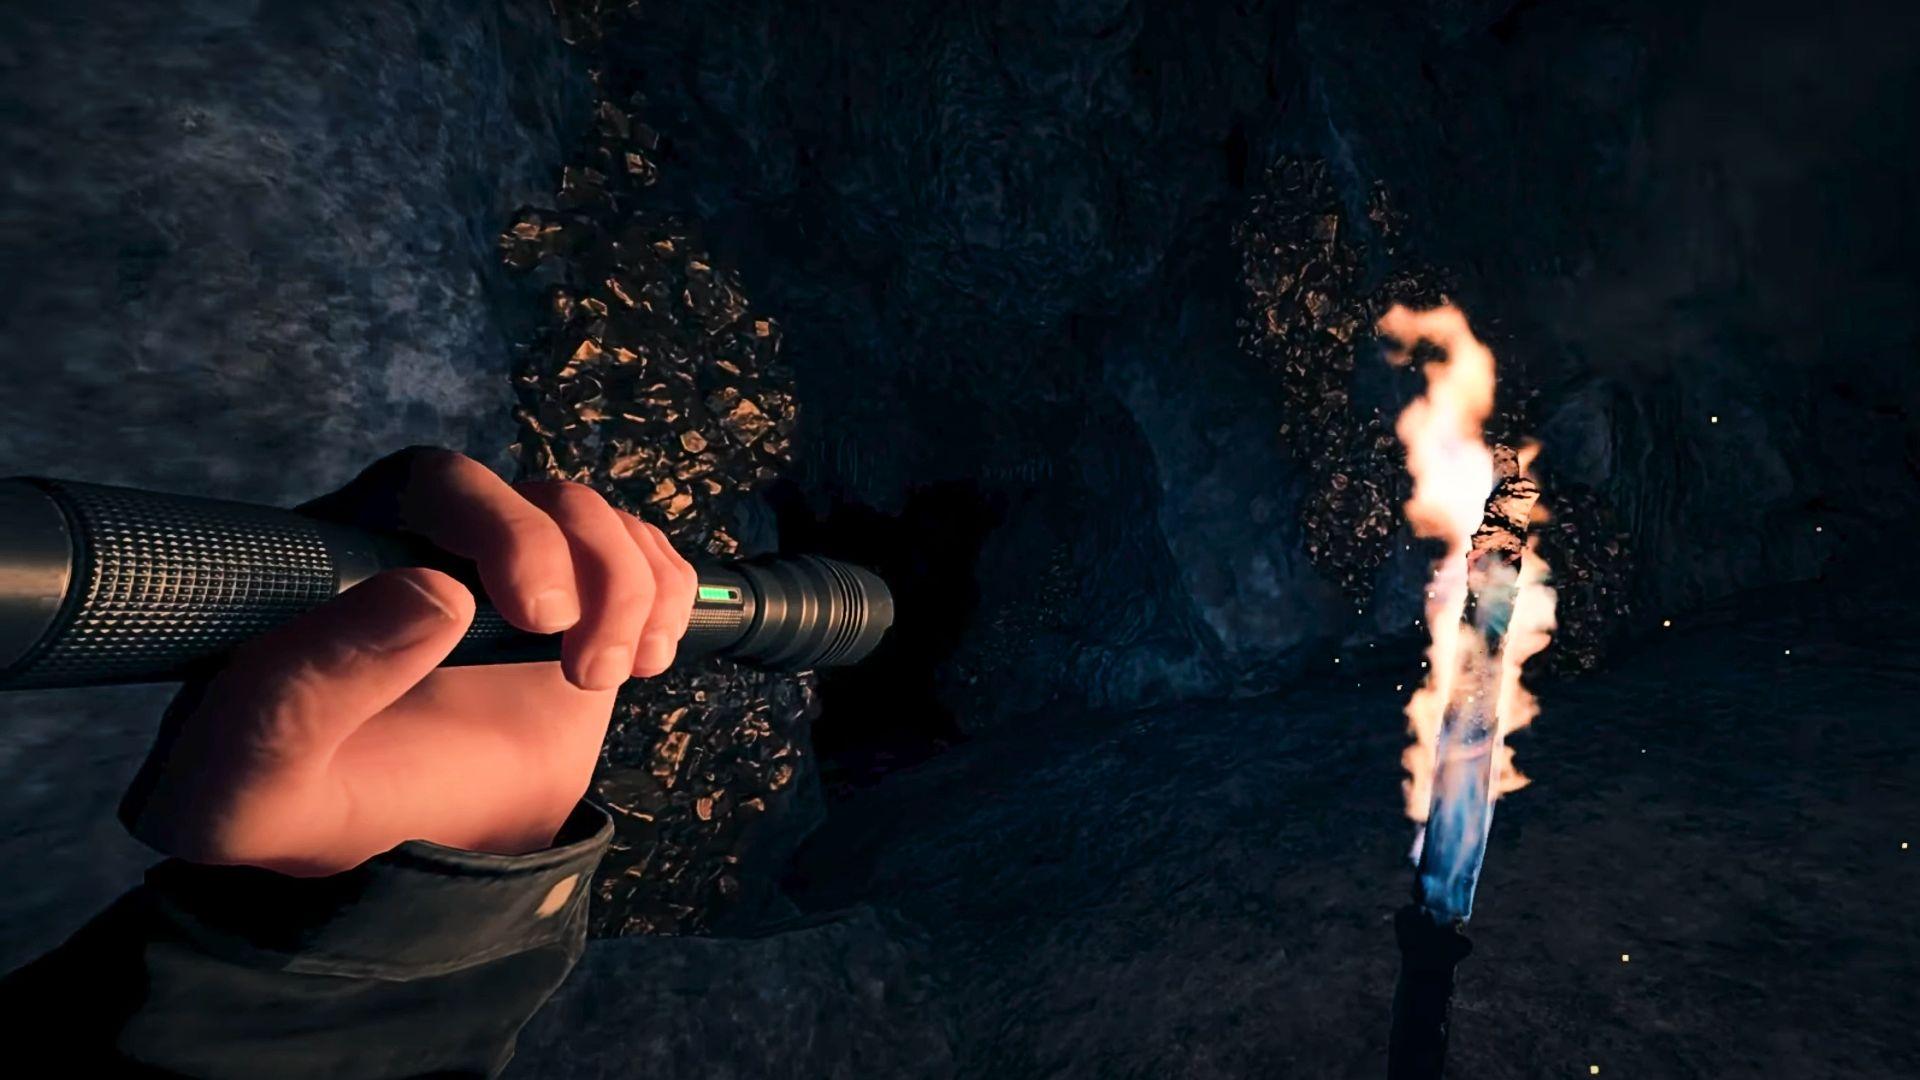 Sons of the Forest rope gun: The major fork in the cave system that'll lead you to the rope gun location in Endnight's survival horror game, characterised by ore and bone piles.